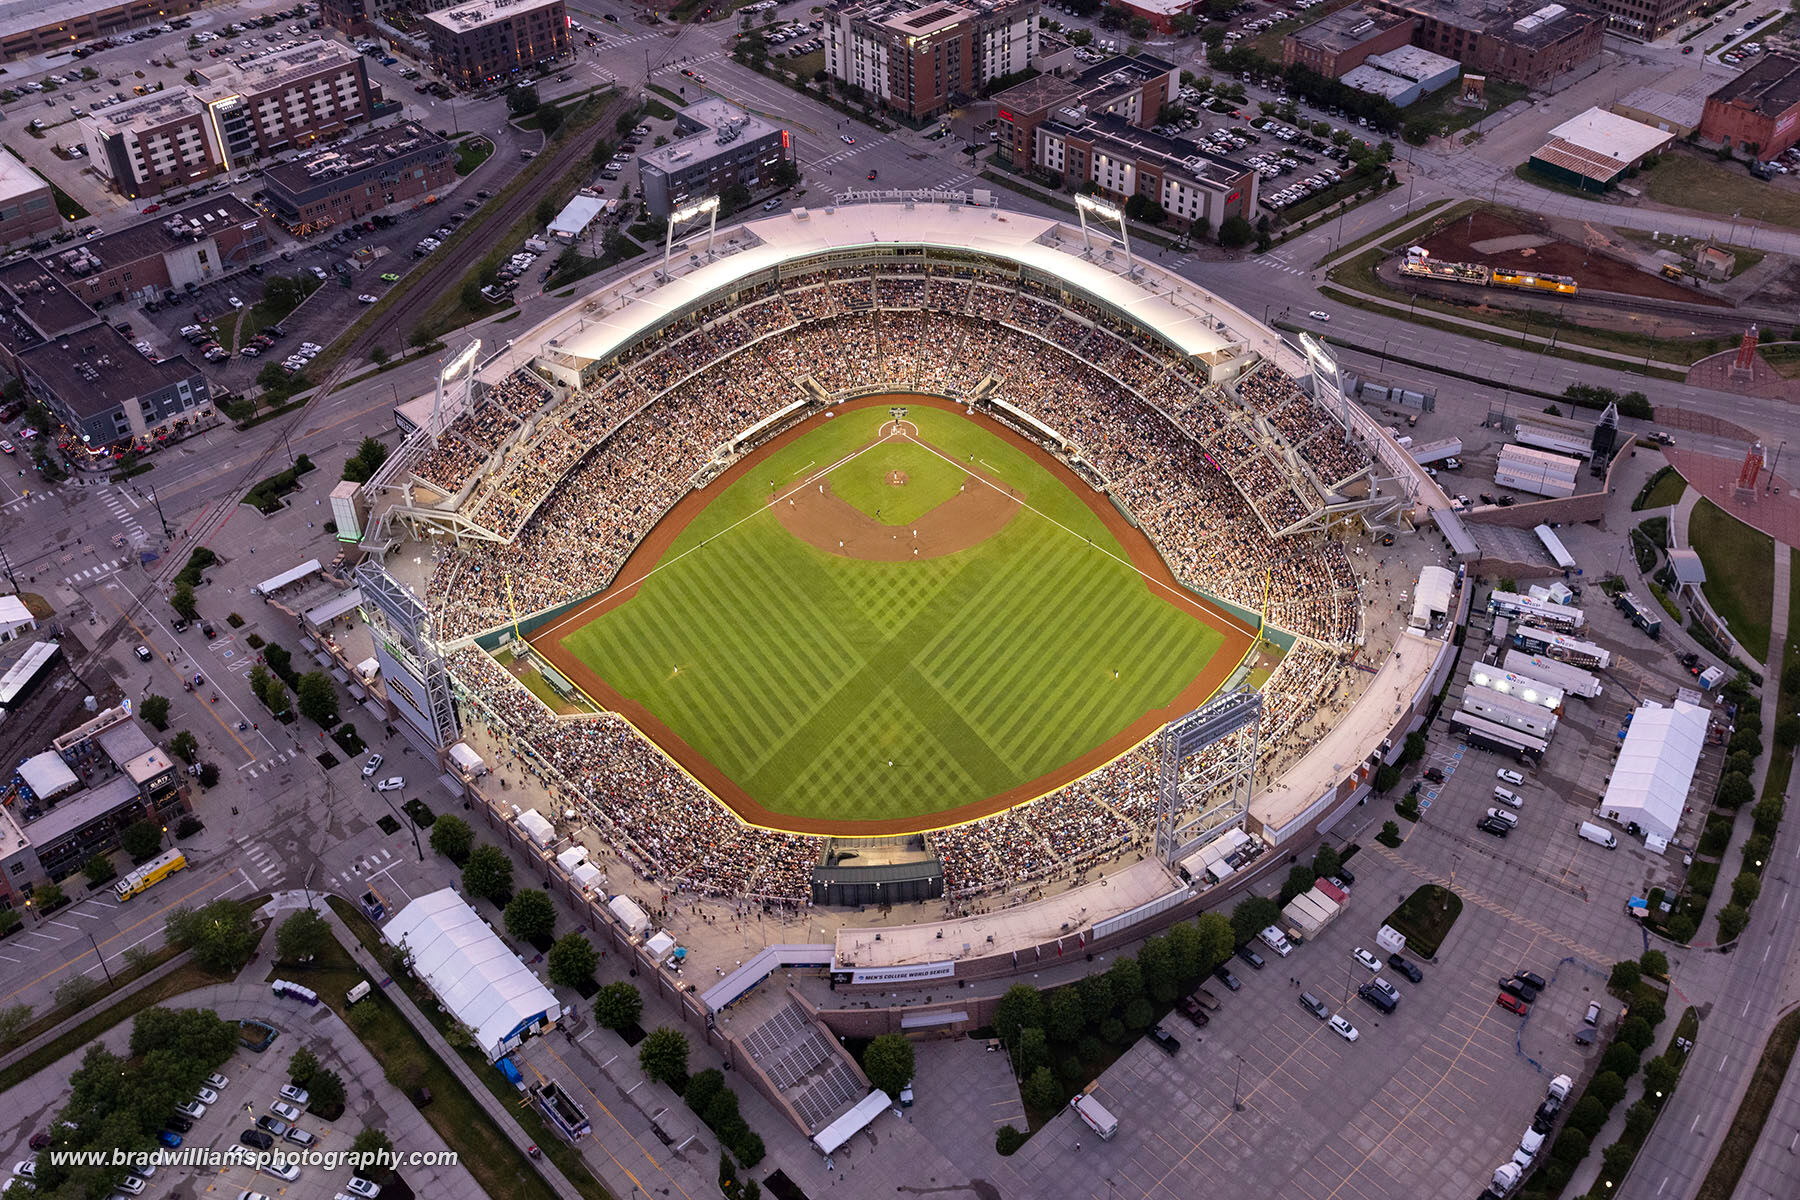 An aerial view of TD Ameritrade Park Omaha in June 2021